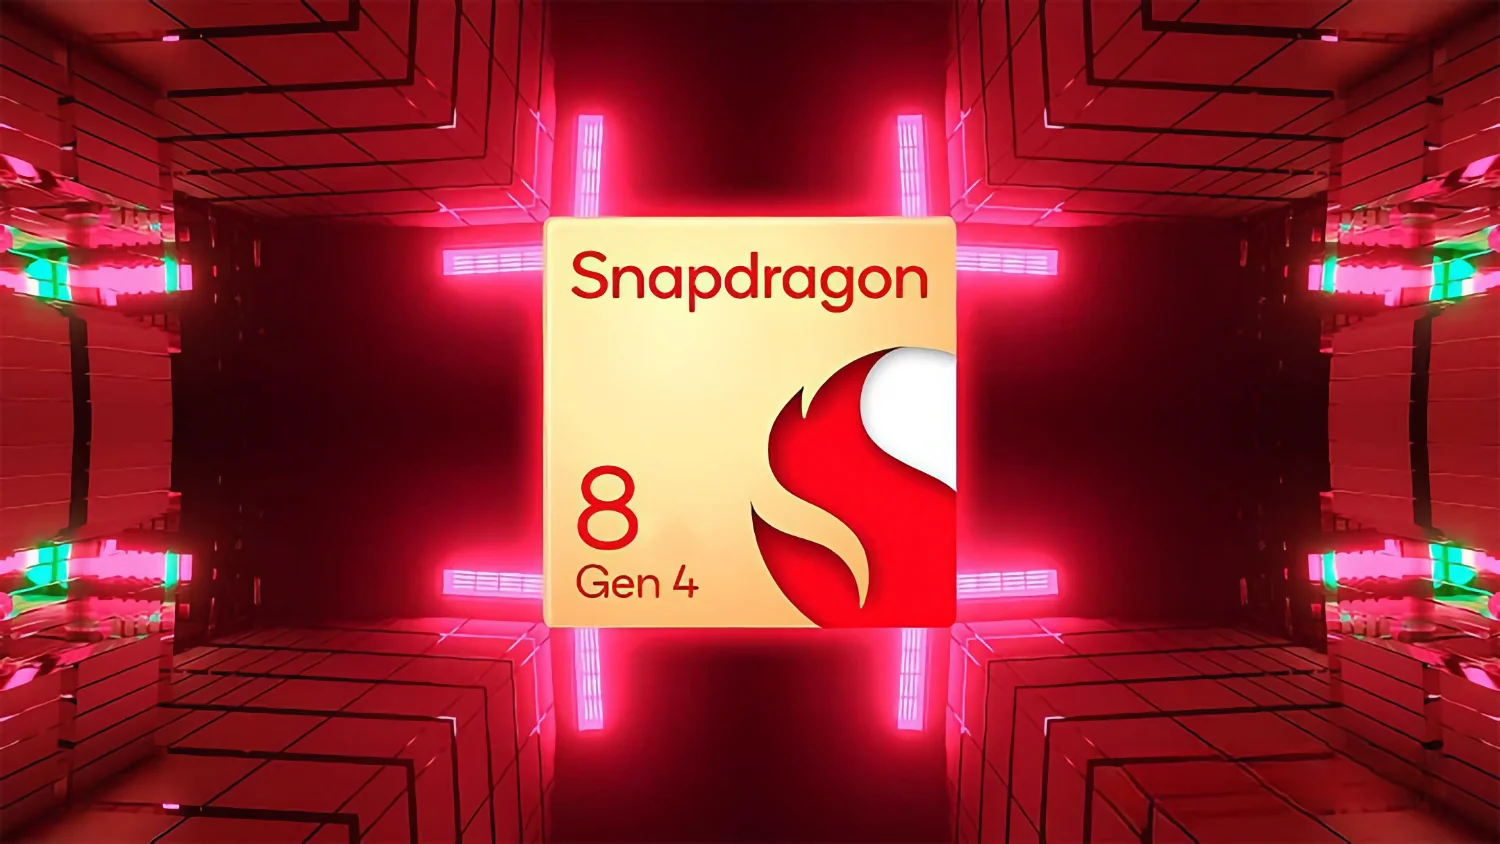 The engineering version of the Snapdragon 8 Gen 4 chip was tested in the game